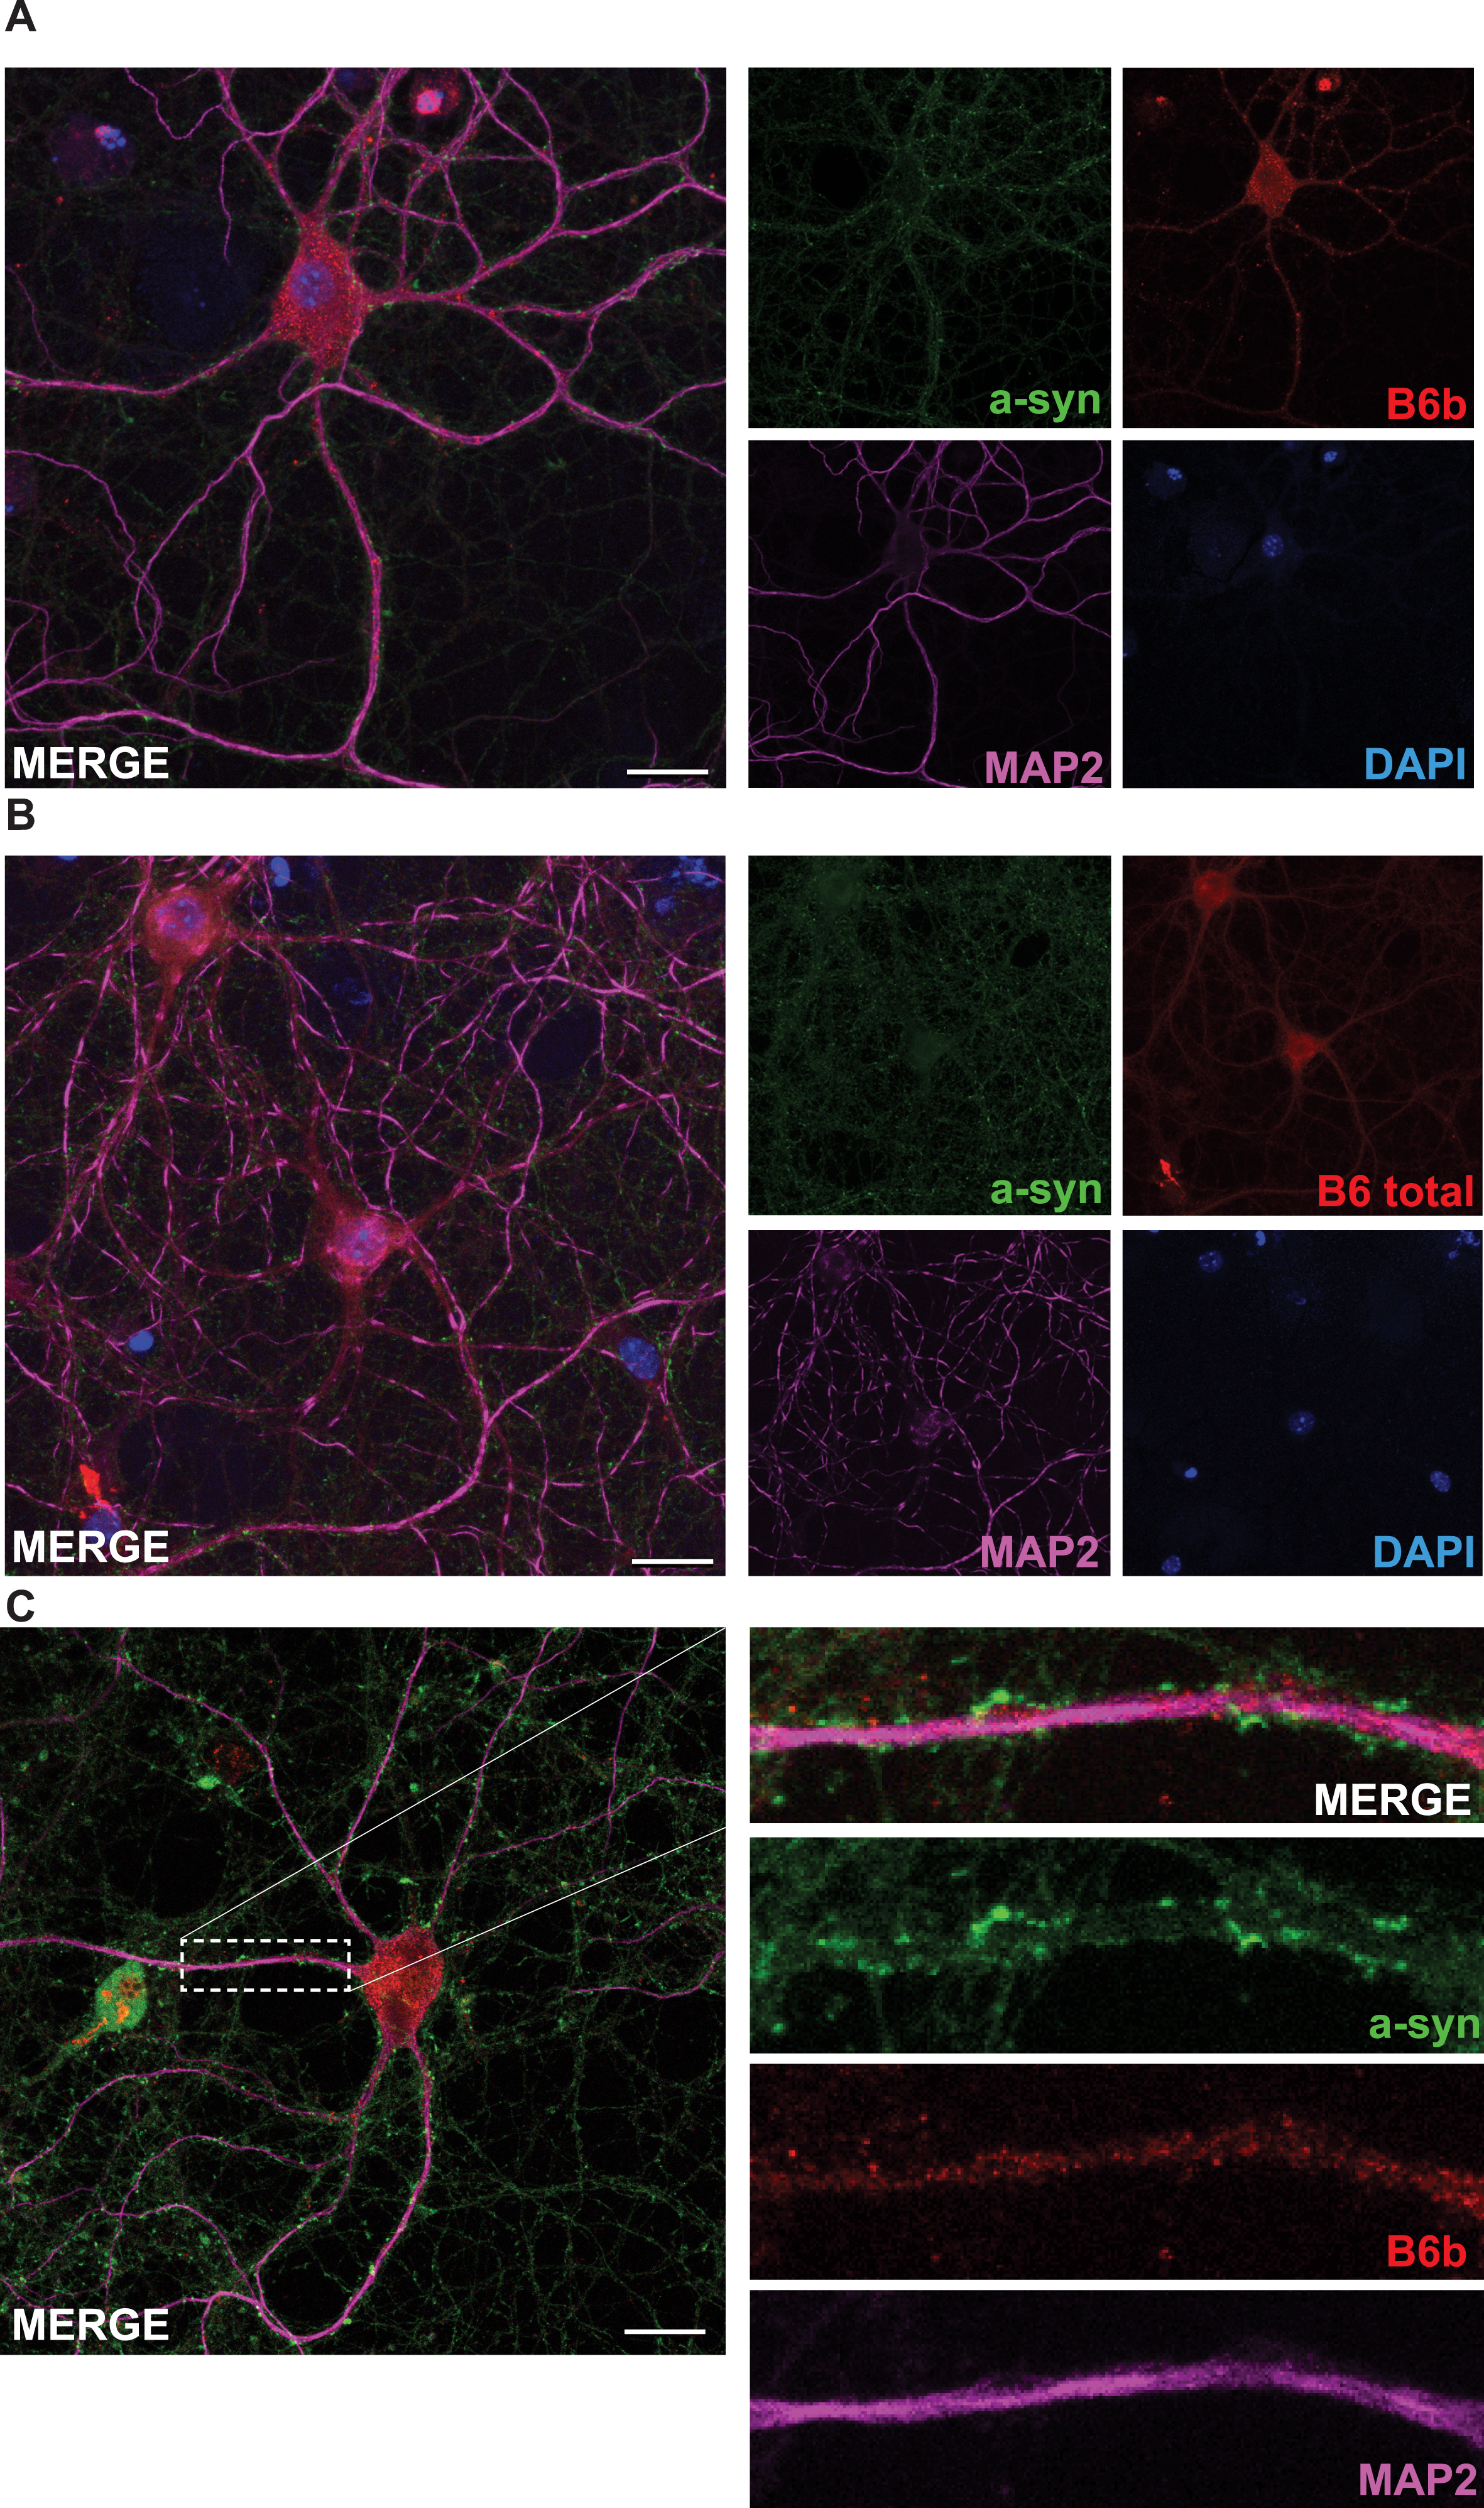 DNAJB6b and total DNAJB6 are expressed in primary neurons. Fixed primary mouse neurons stained with anti-DNAJB6b (A) or anti-total DNAJB6 (B) as well as anti-MAP2, anti-α-syn and dapi and fluorescently labeled anti rabbit Alexa 488 and anti sheep Cy5 antibodies. C) Depicts a close up picture of a dendrite stained with antibodies against α-syn, MAP2, and DNAJB6b as well as secondary fluorescently labeled anti-rabbit and anti-sheep antibodies.